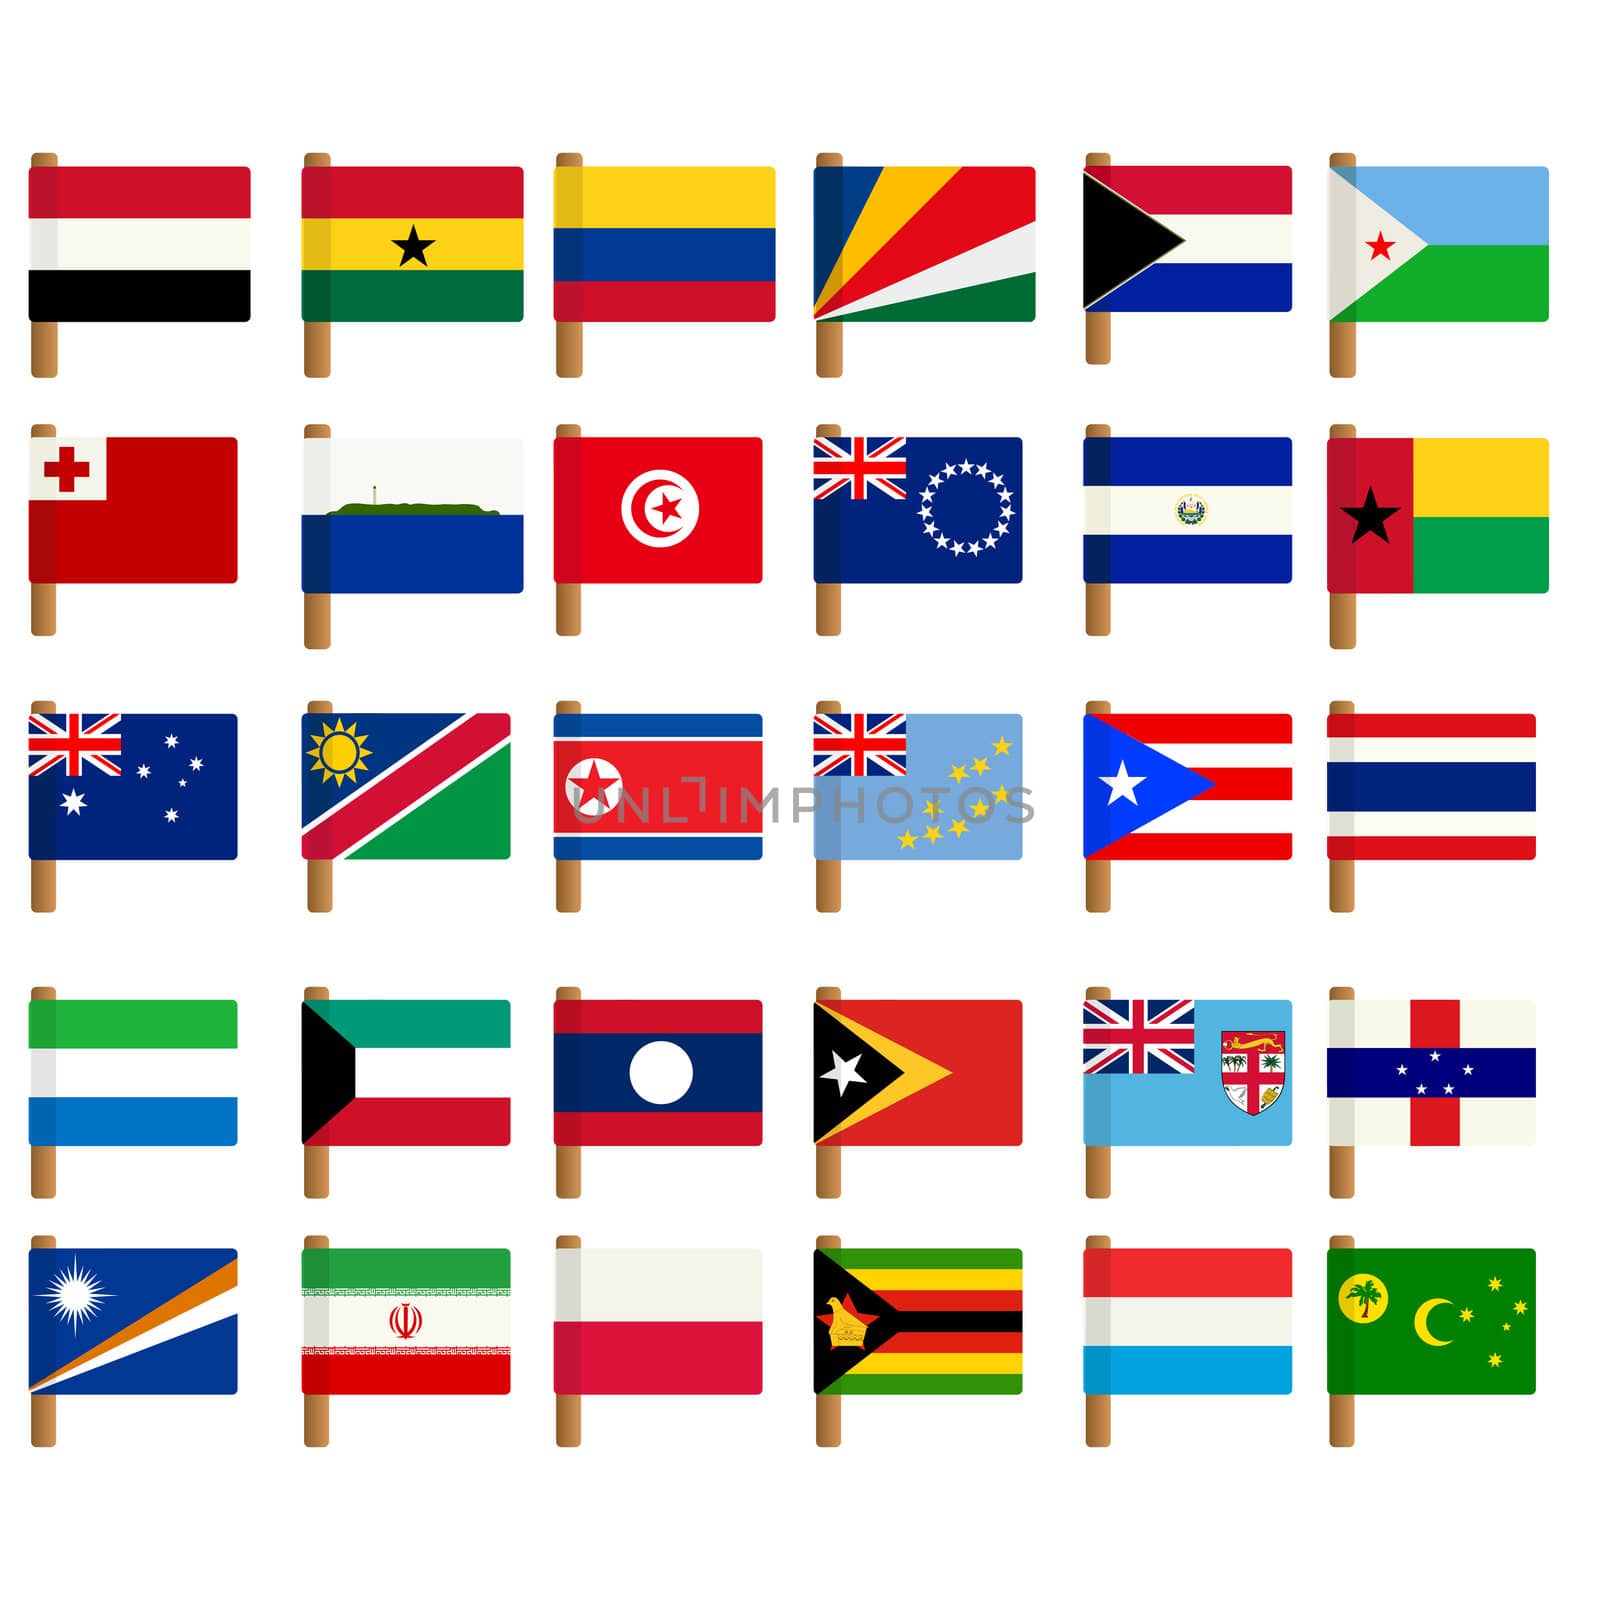 World flag icons set 4 by Lirch